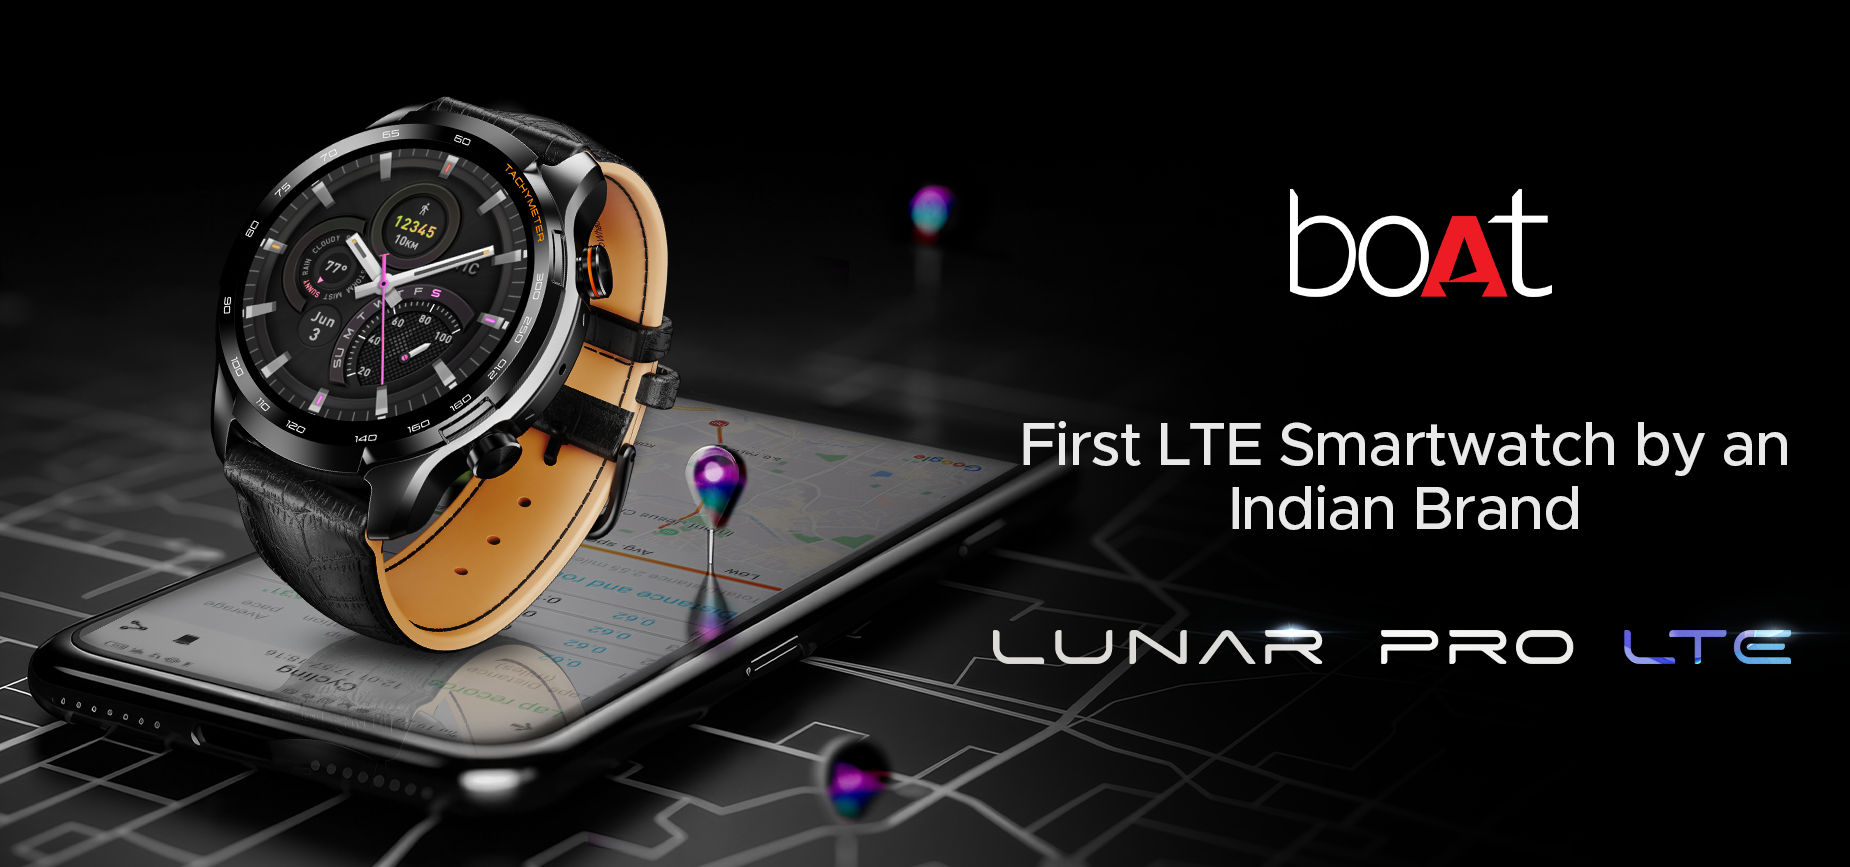 boAt Lunar Pro LTE with 1.39″ AMOLED display, GPS, eSIM support